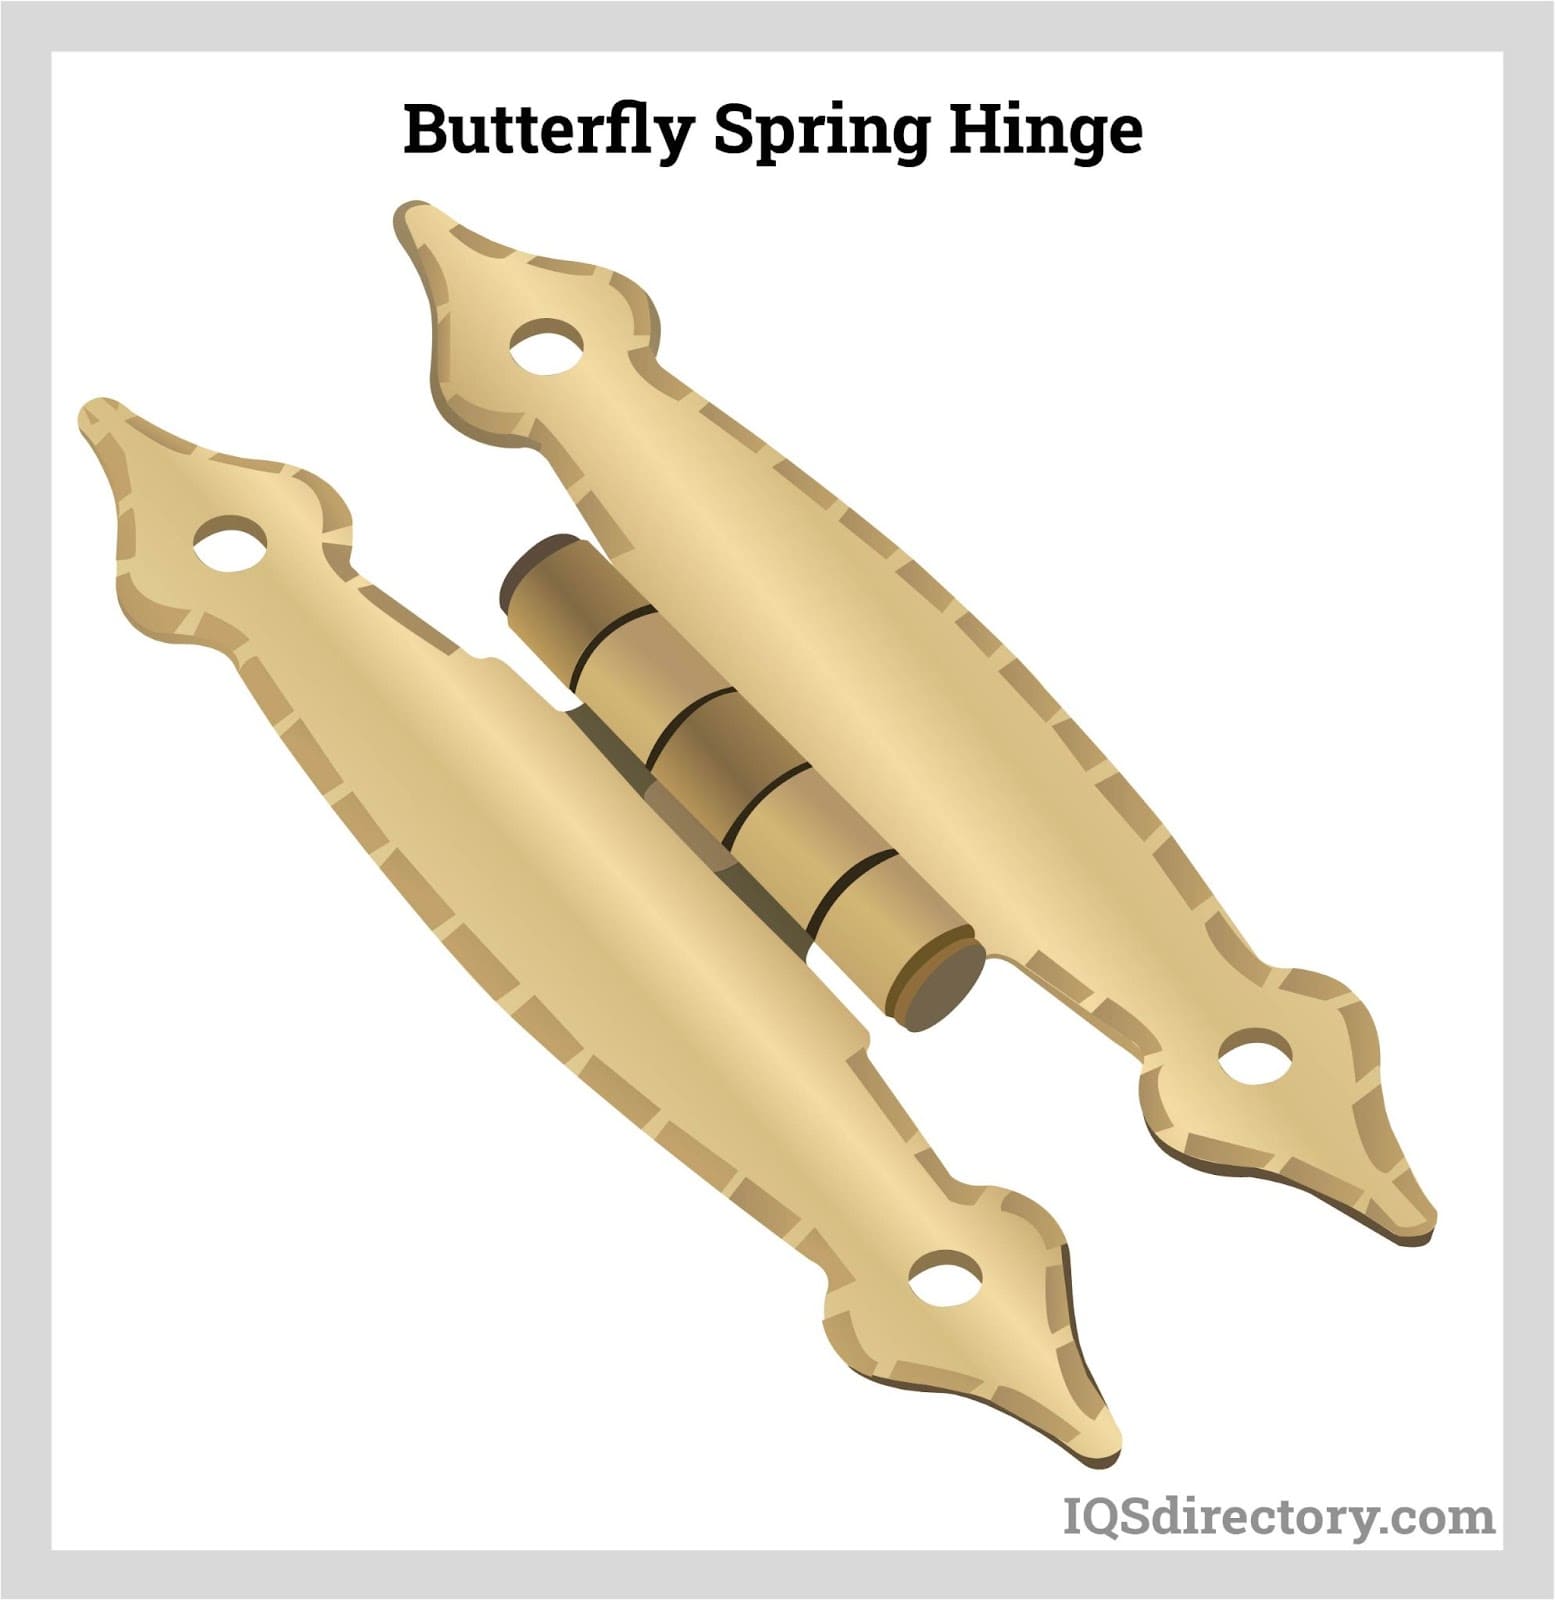 Butterfly Spring Hinge